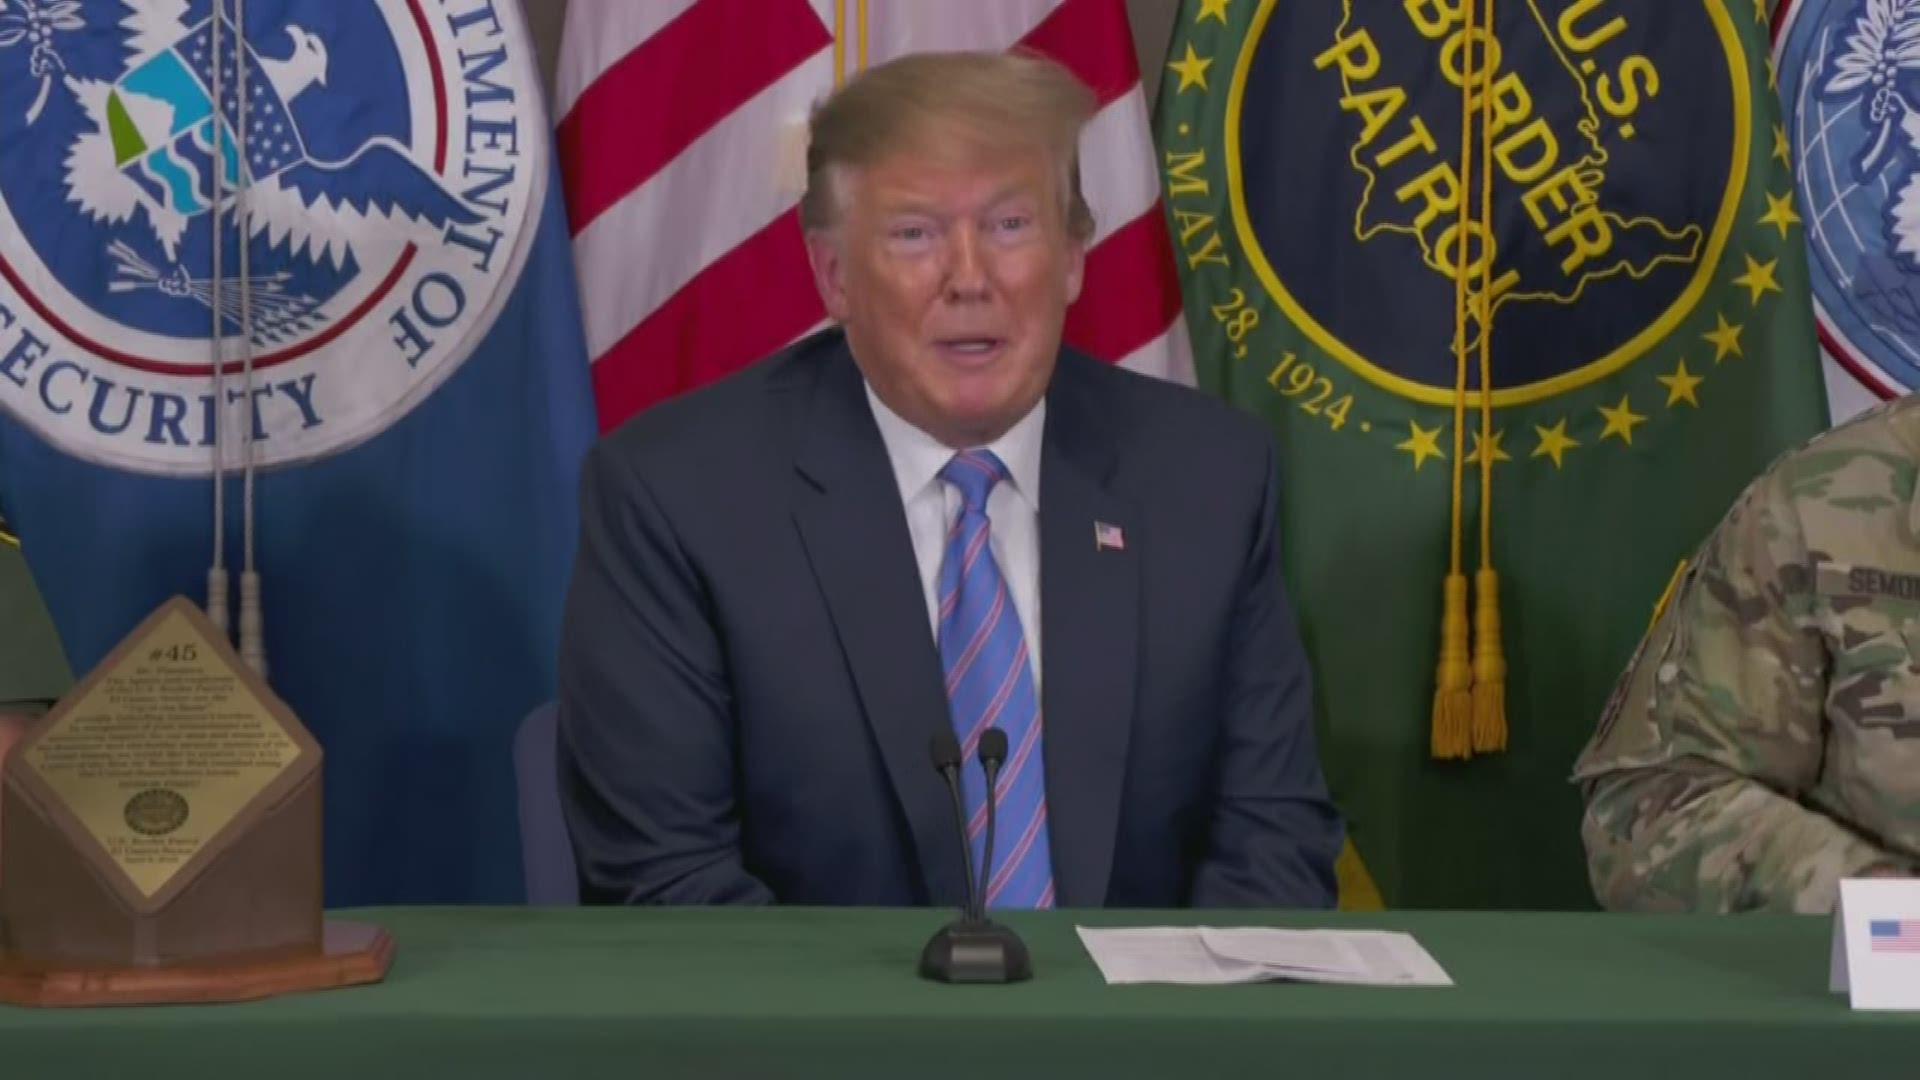 When asked about the California governor's criticism of Trump's views on asylum, the president said governor Newsom is in a different world.